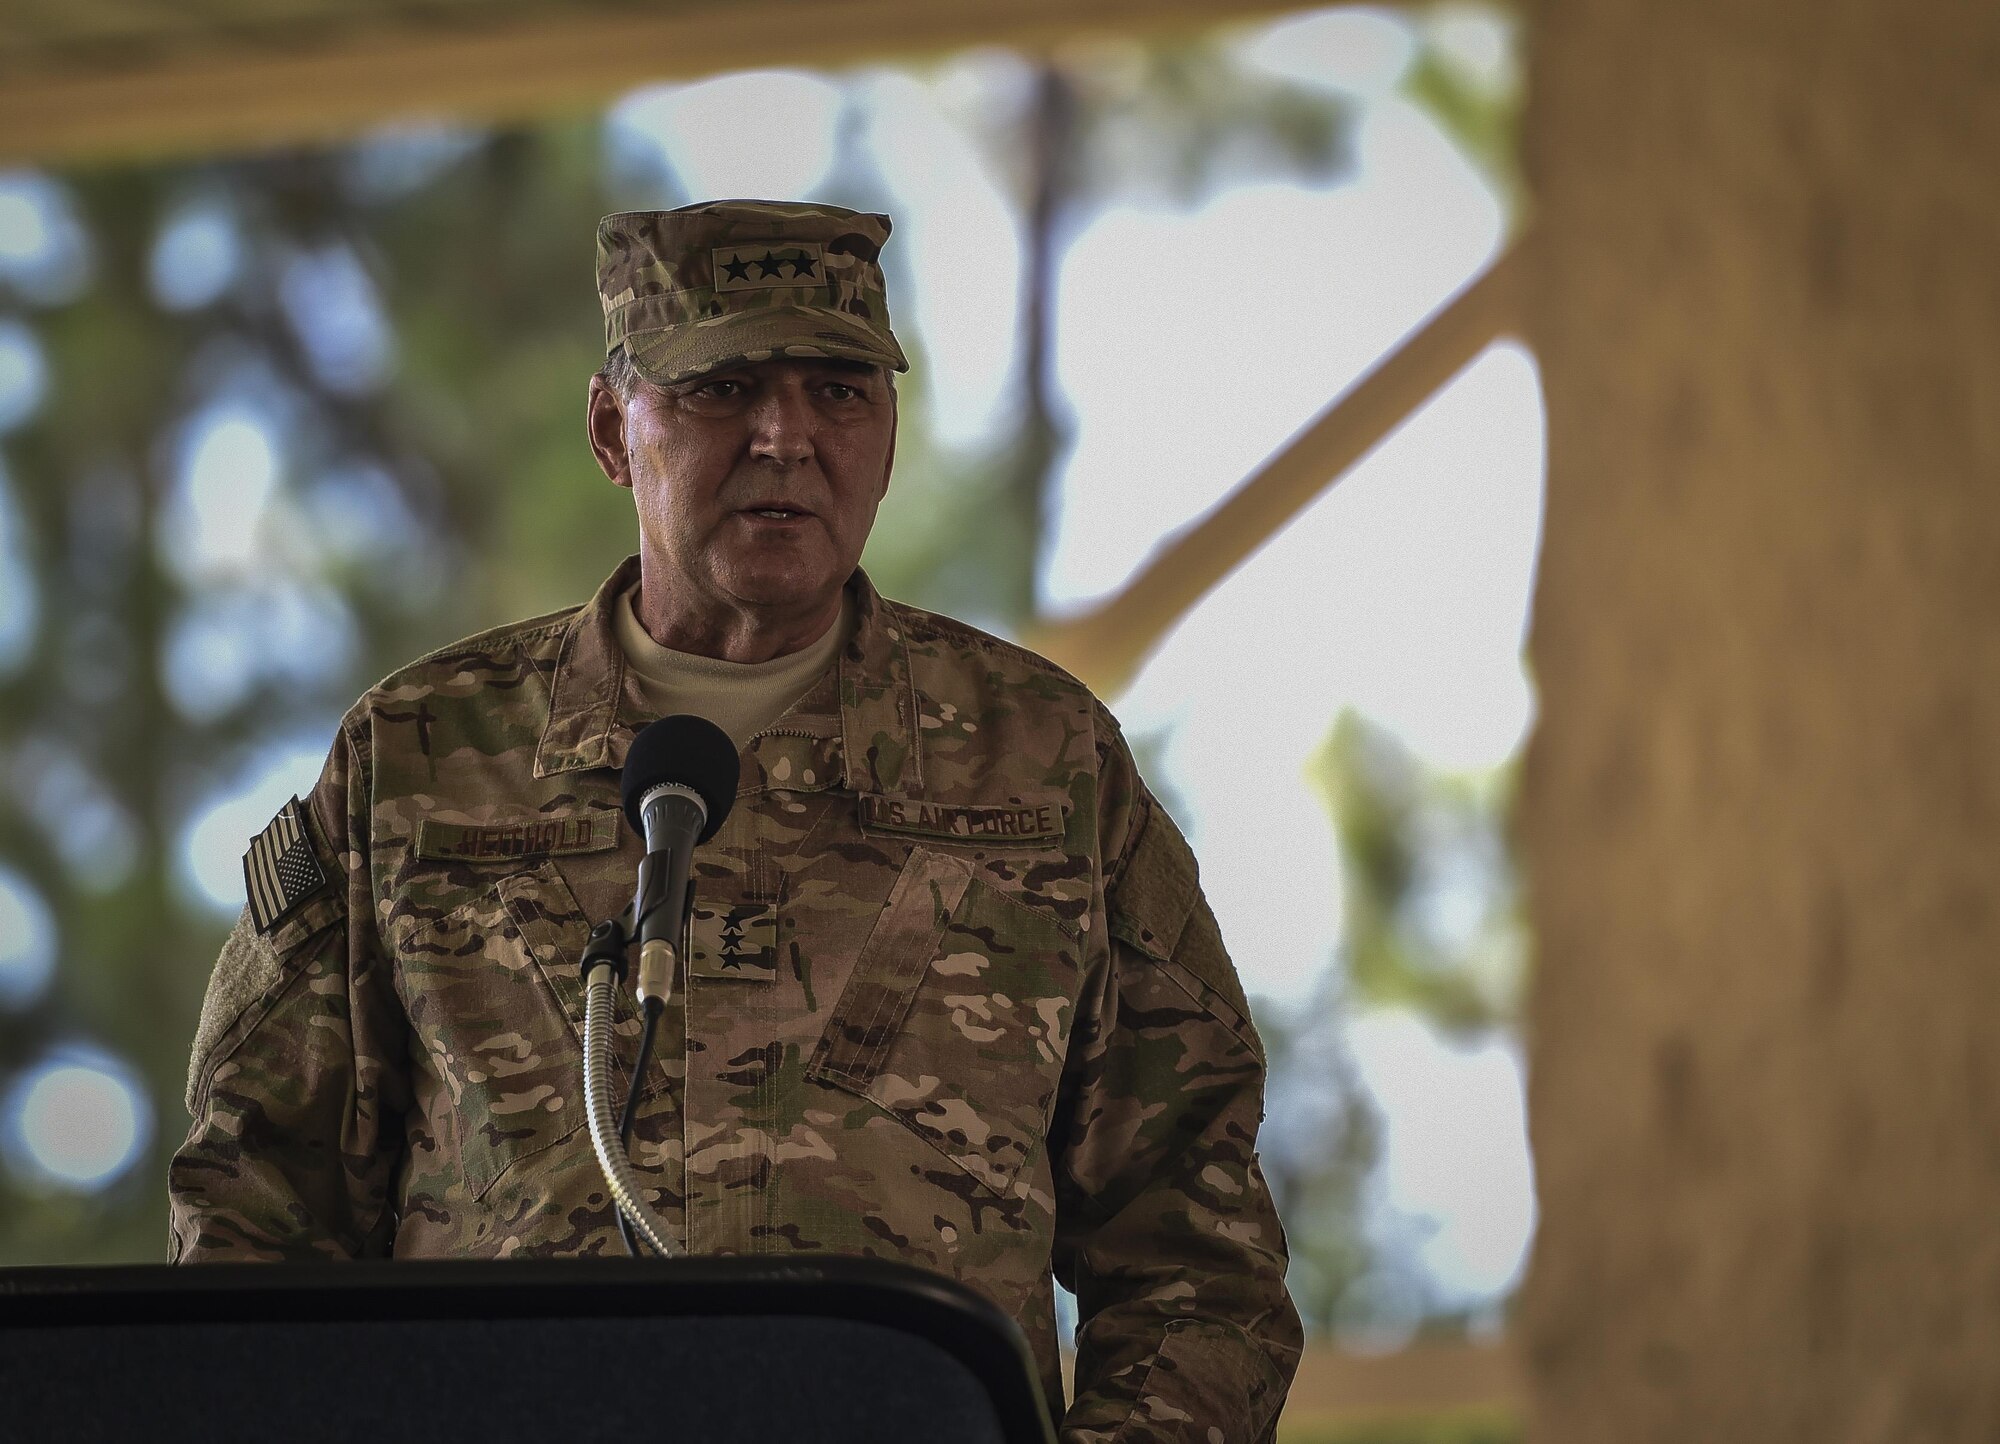 Lt. Gen. Brad Heithold, commander of Air Force Special Operations Command, speaks during the 24th Special Operations Wing assumption of command at Hurlburt Field, Fla., July 14, 2016. Heithold presided over the assumption of command, where Col. Michael Martin took command of the sole Special Tactics wing in the Air Force. (U.S. Air Force photo by Senior Airman Ryan Conroy)